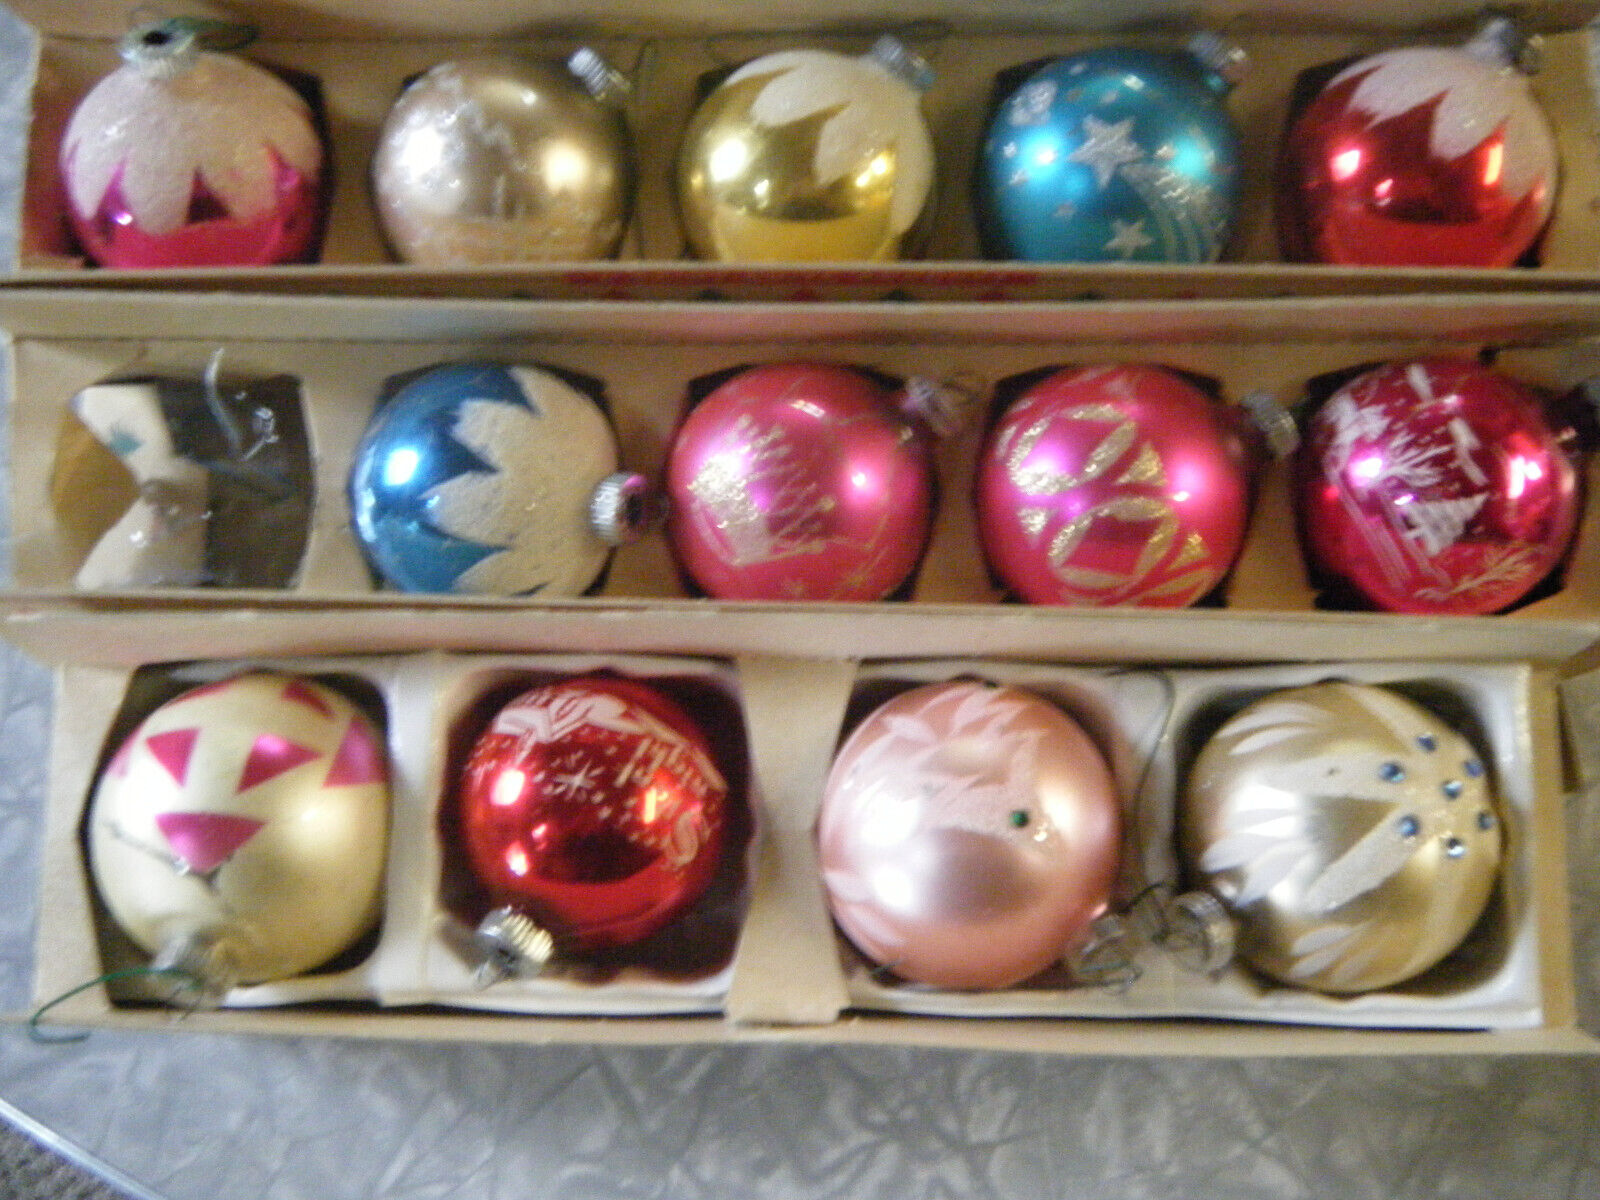 12 Vintage 1940s-60s Assorted USA Made Ornaments Mostly Shiny Brite in 1940s Box